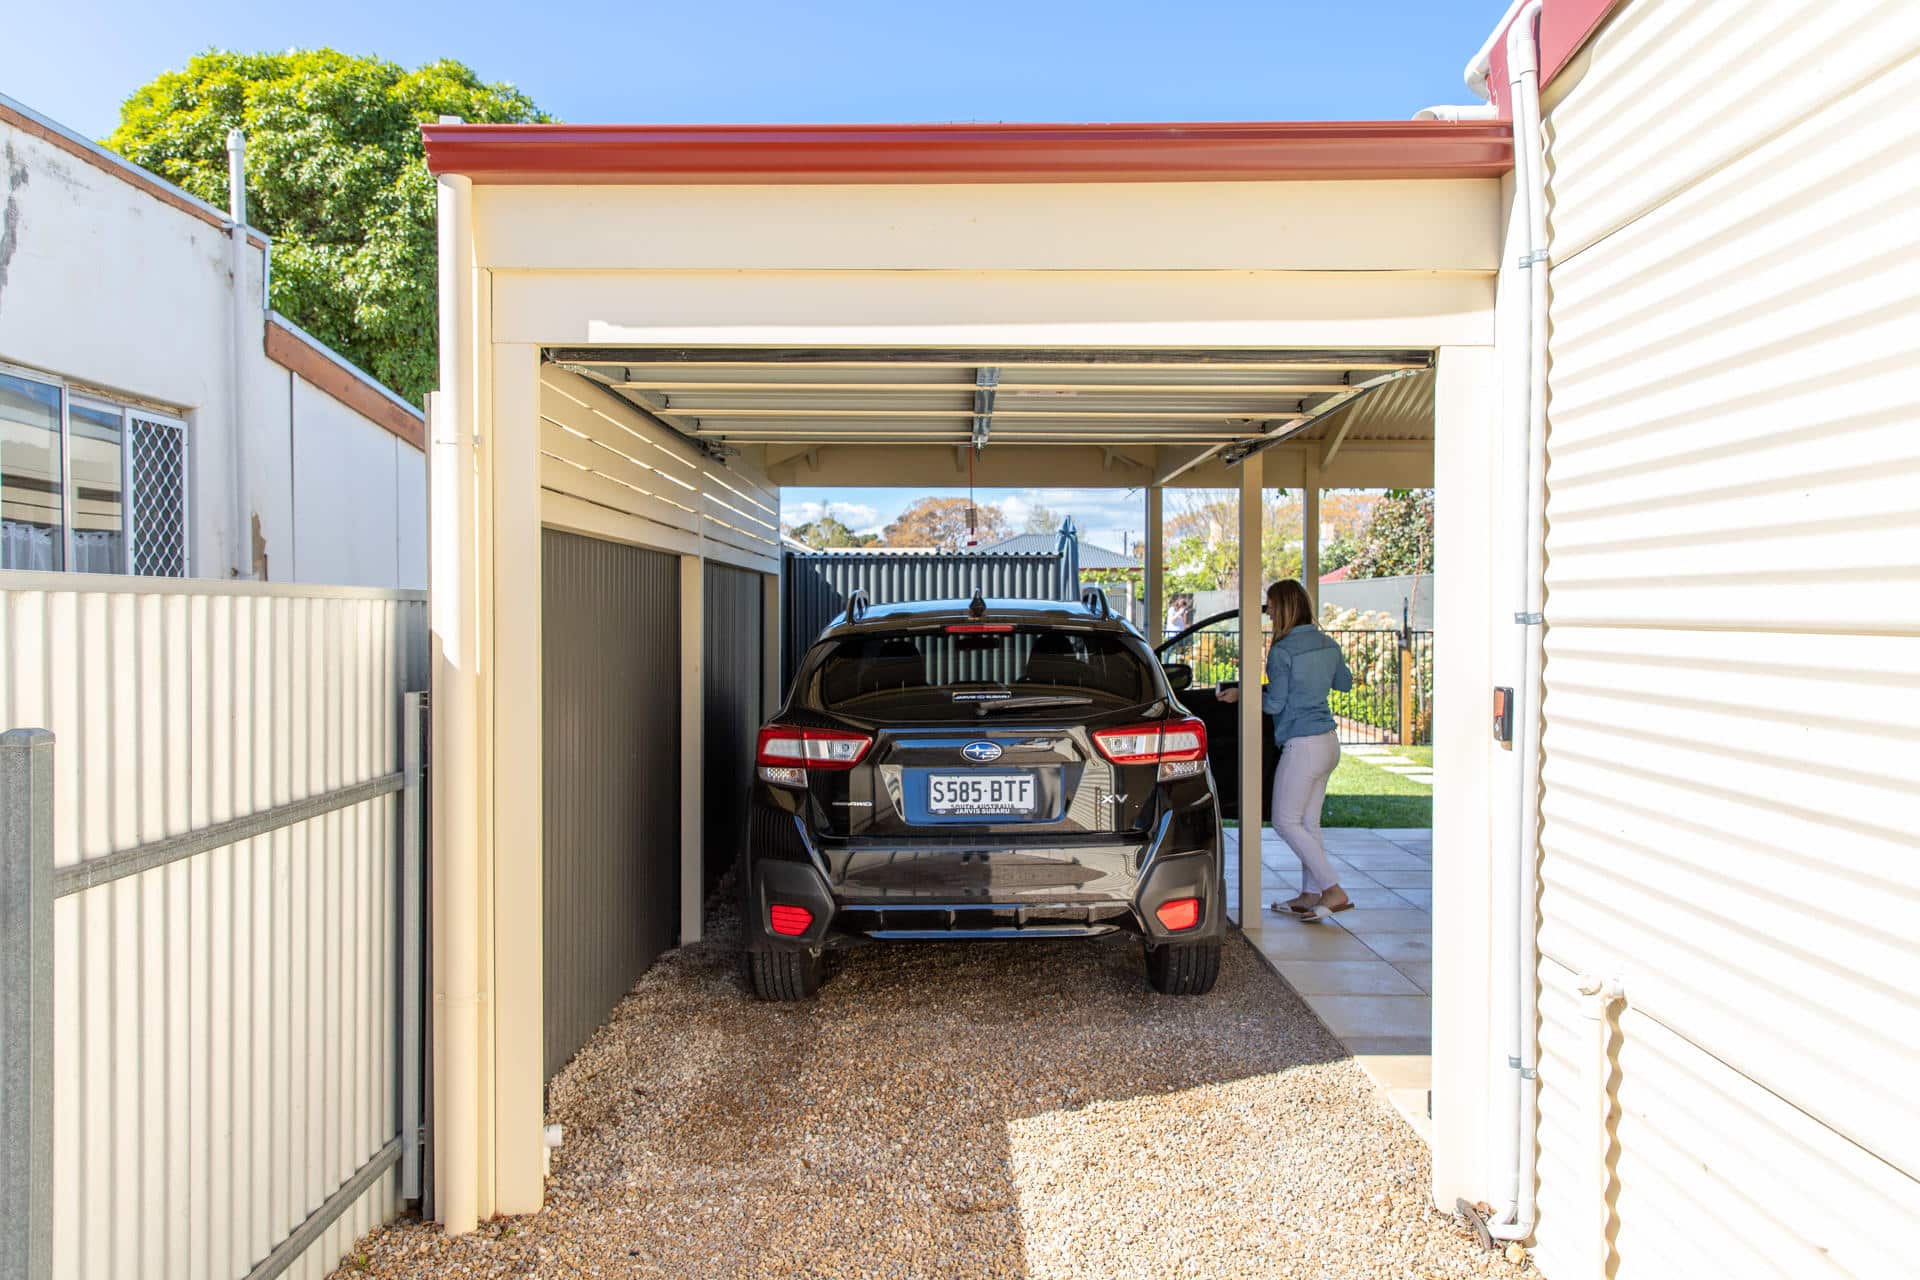 How can a carport help me this summer - A single carport can fit in a small space at the side of your house, Australian Outdoor Living